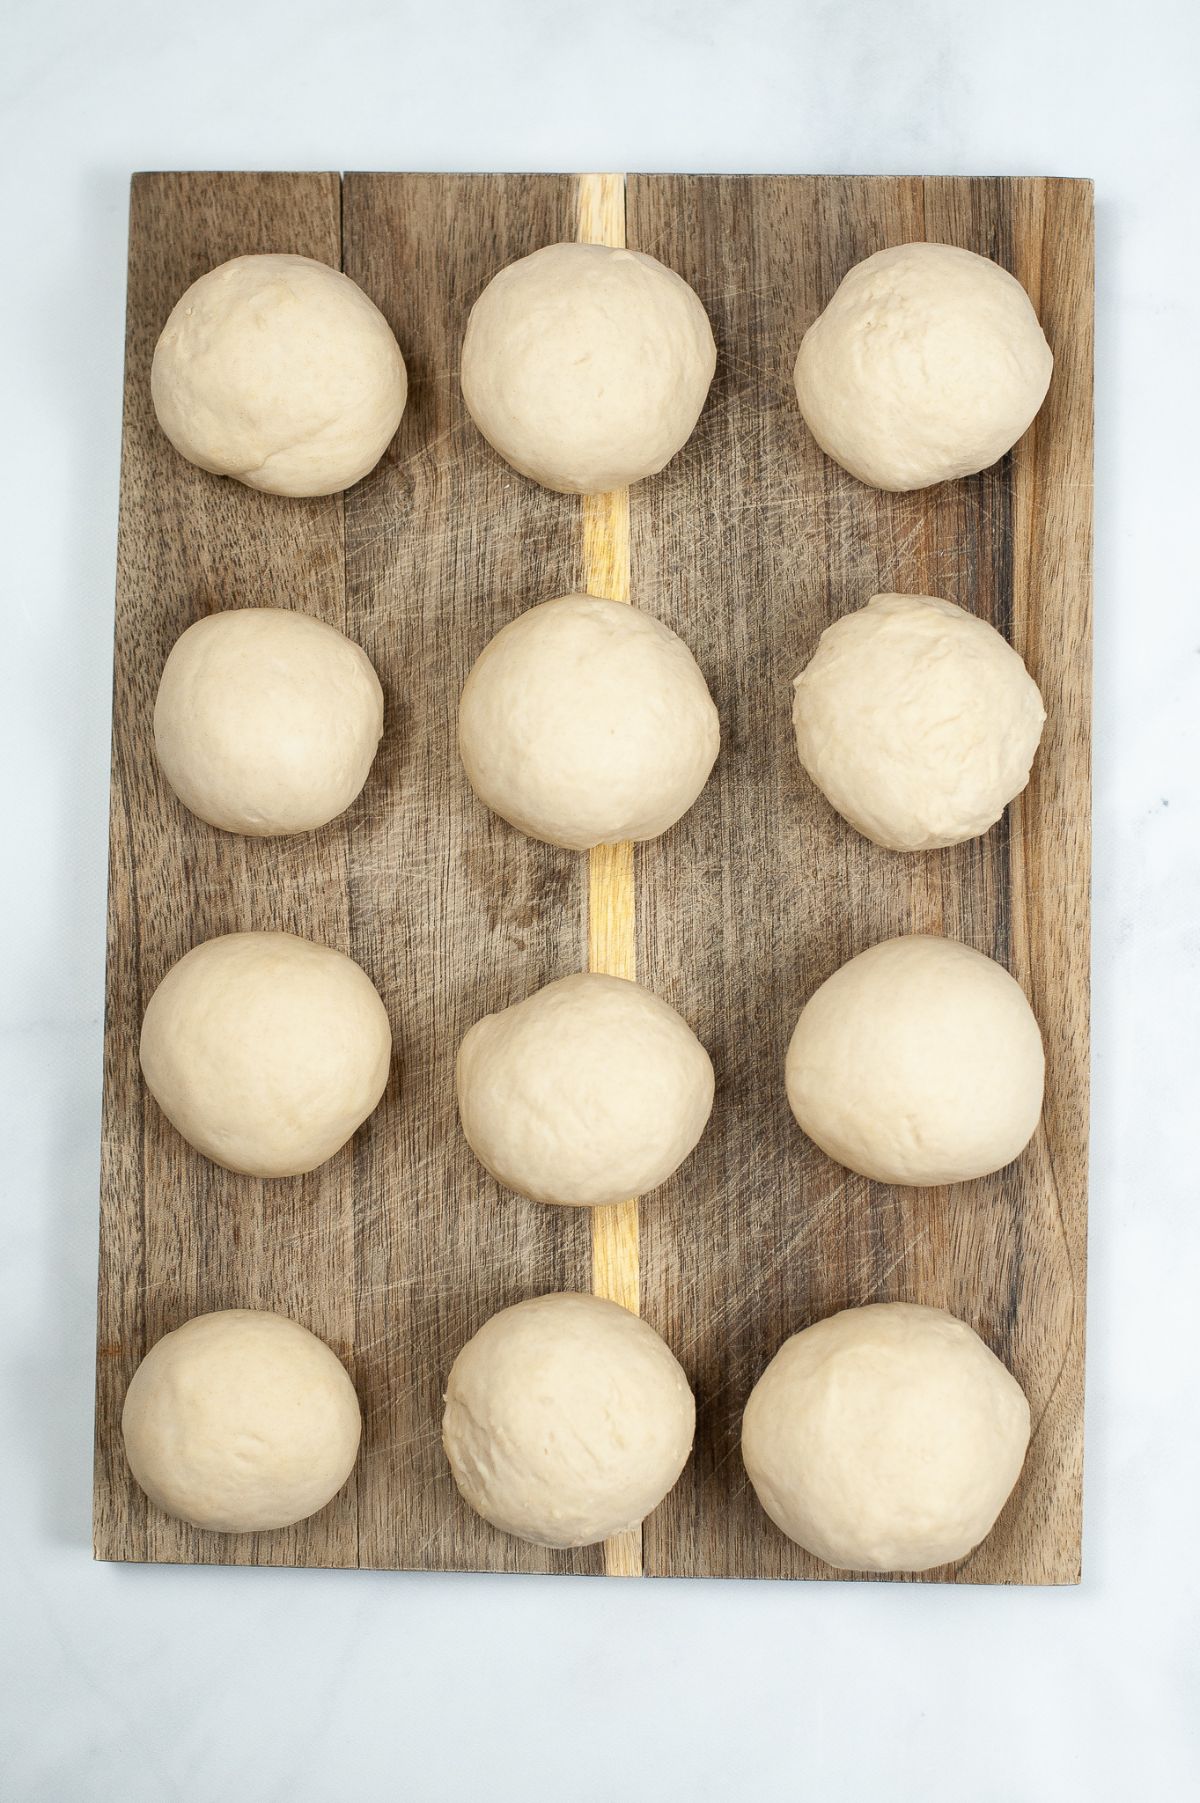 12 shaped dough balls as big as golf balls placed on top of a wooden chopping board.